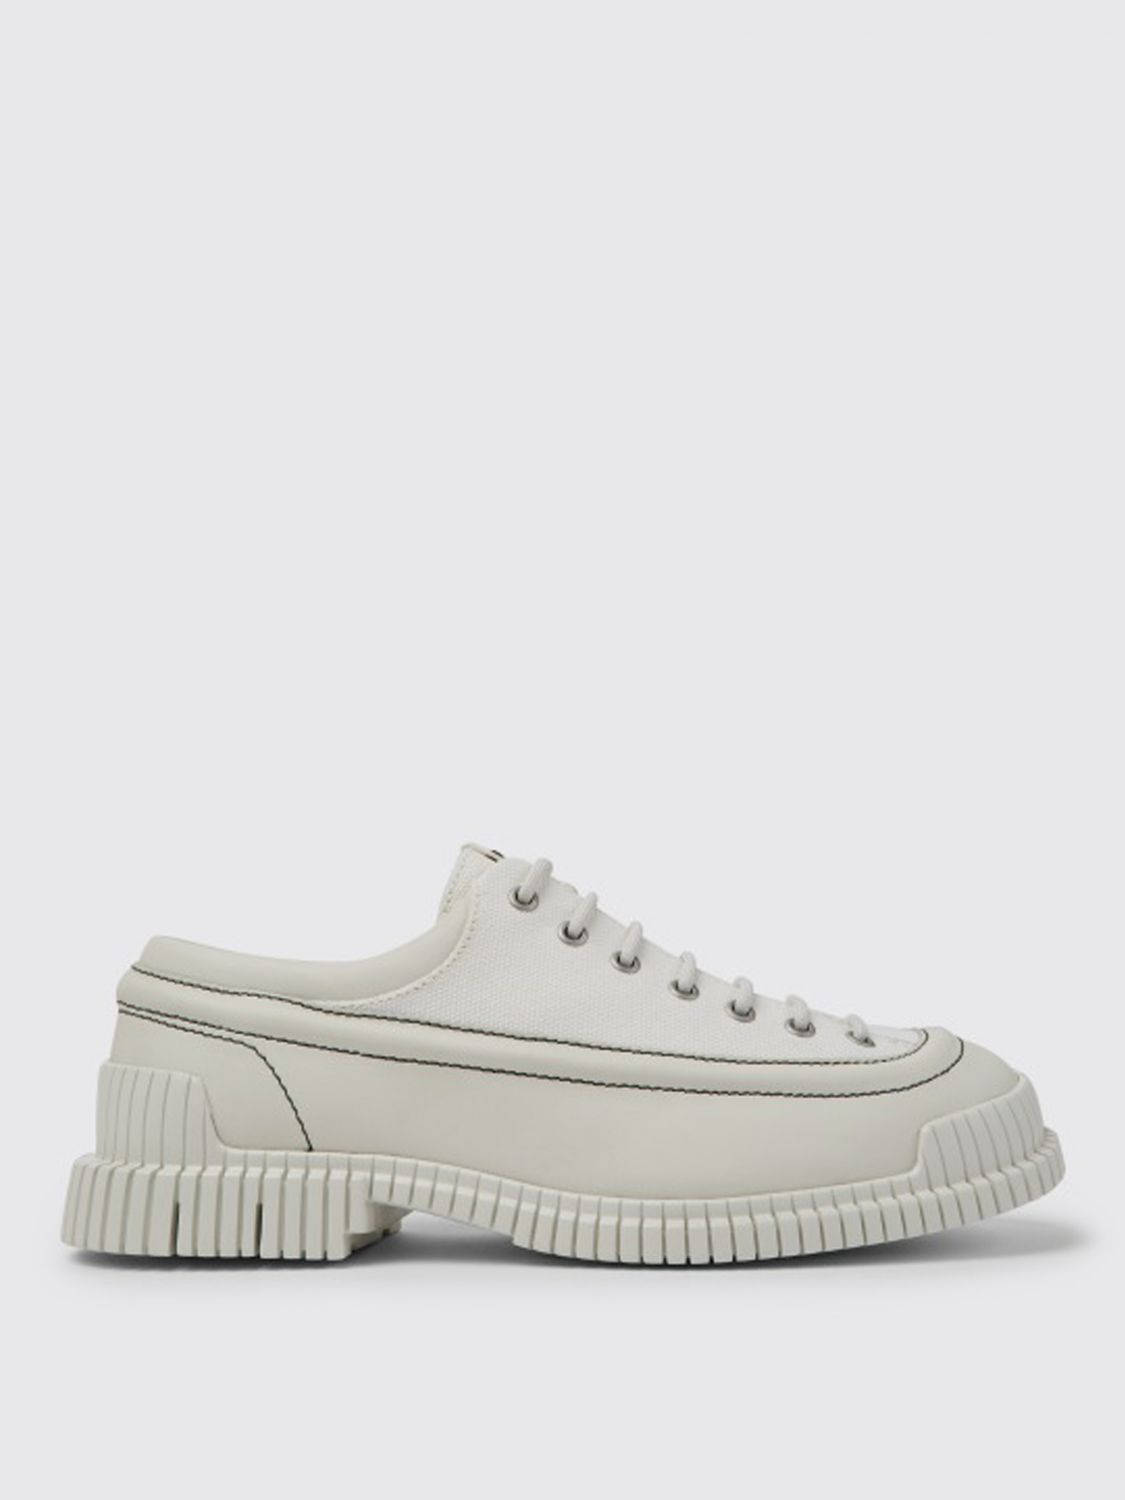 Camper Pix Laceup Shoe In Calfskin And Cotton In Weiss | ModeSens